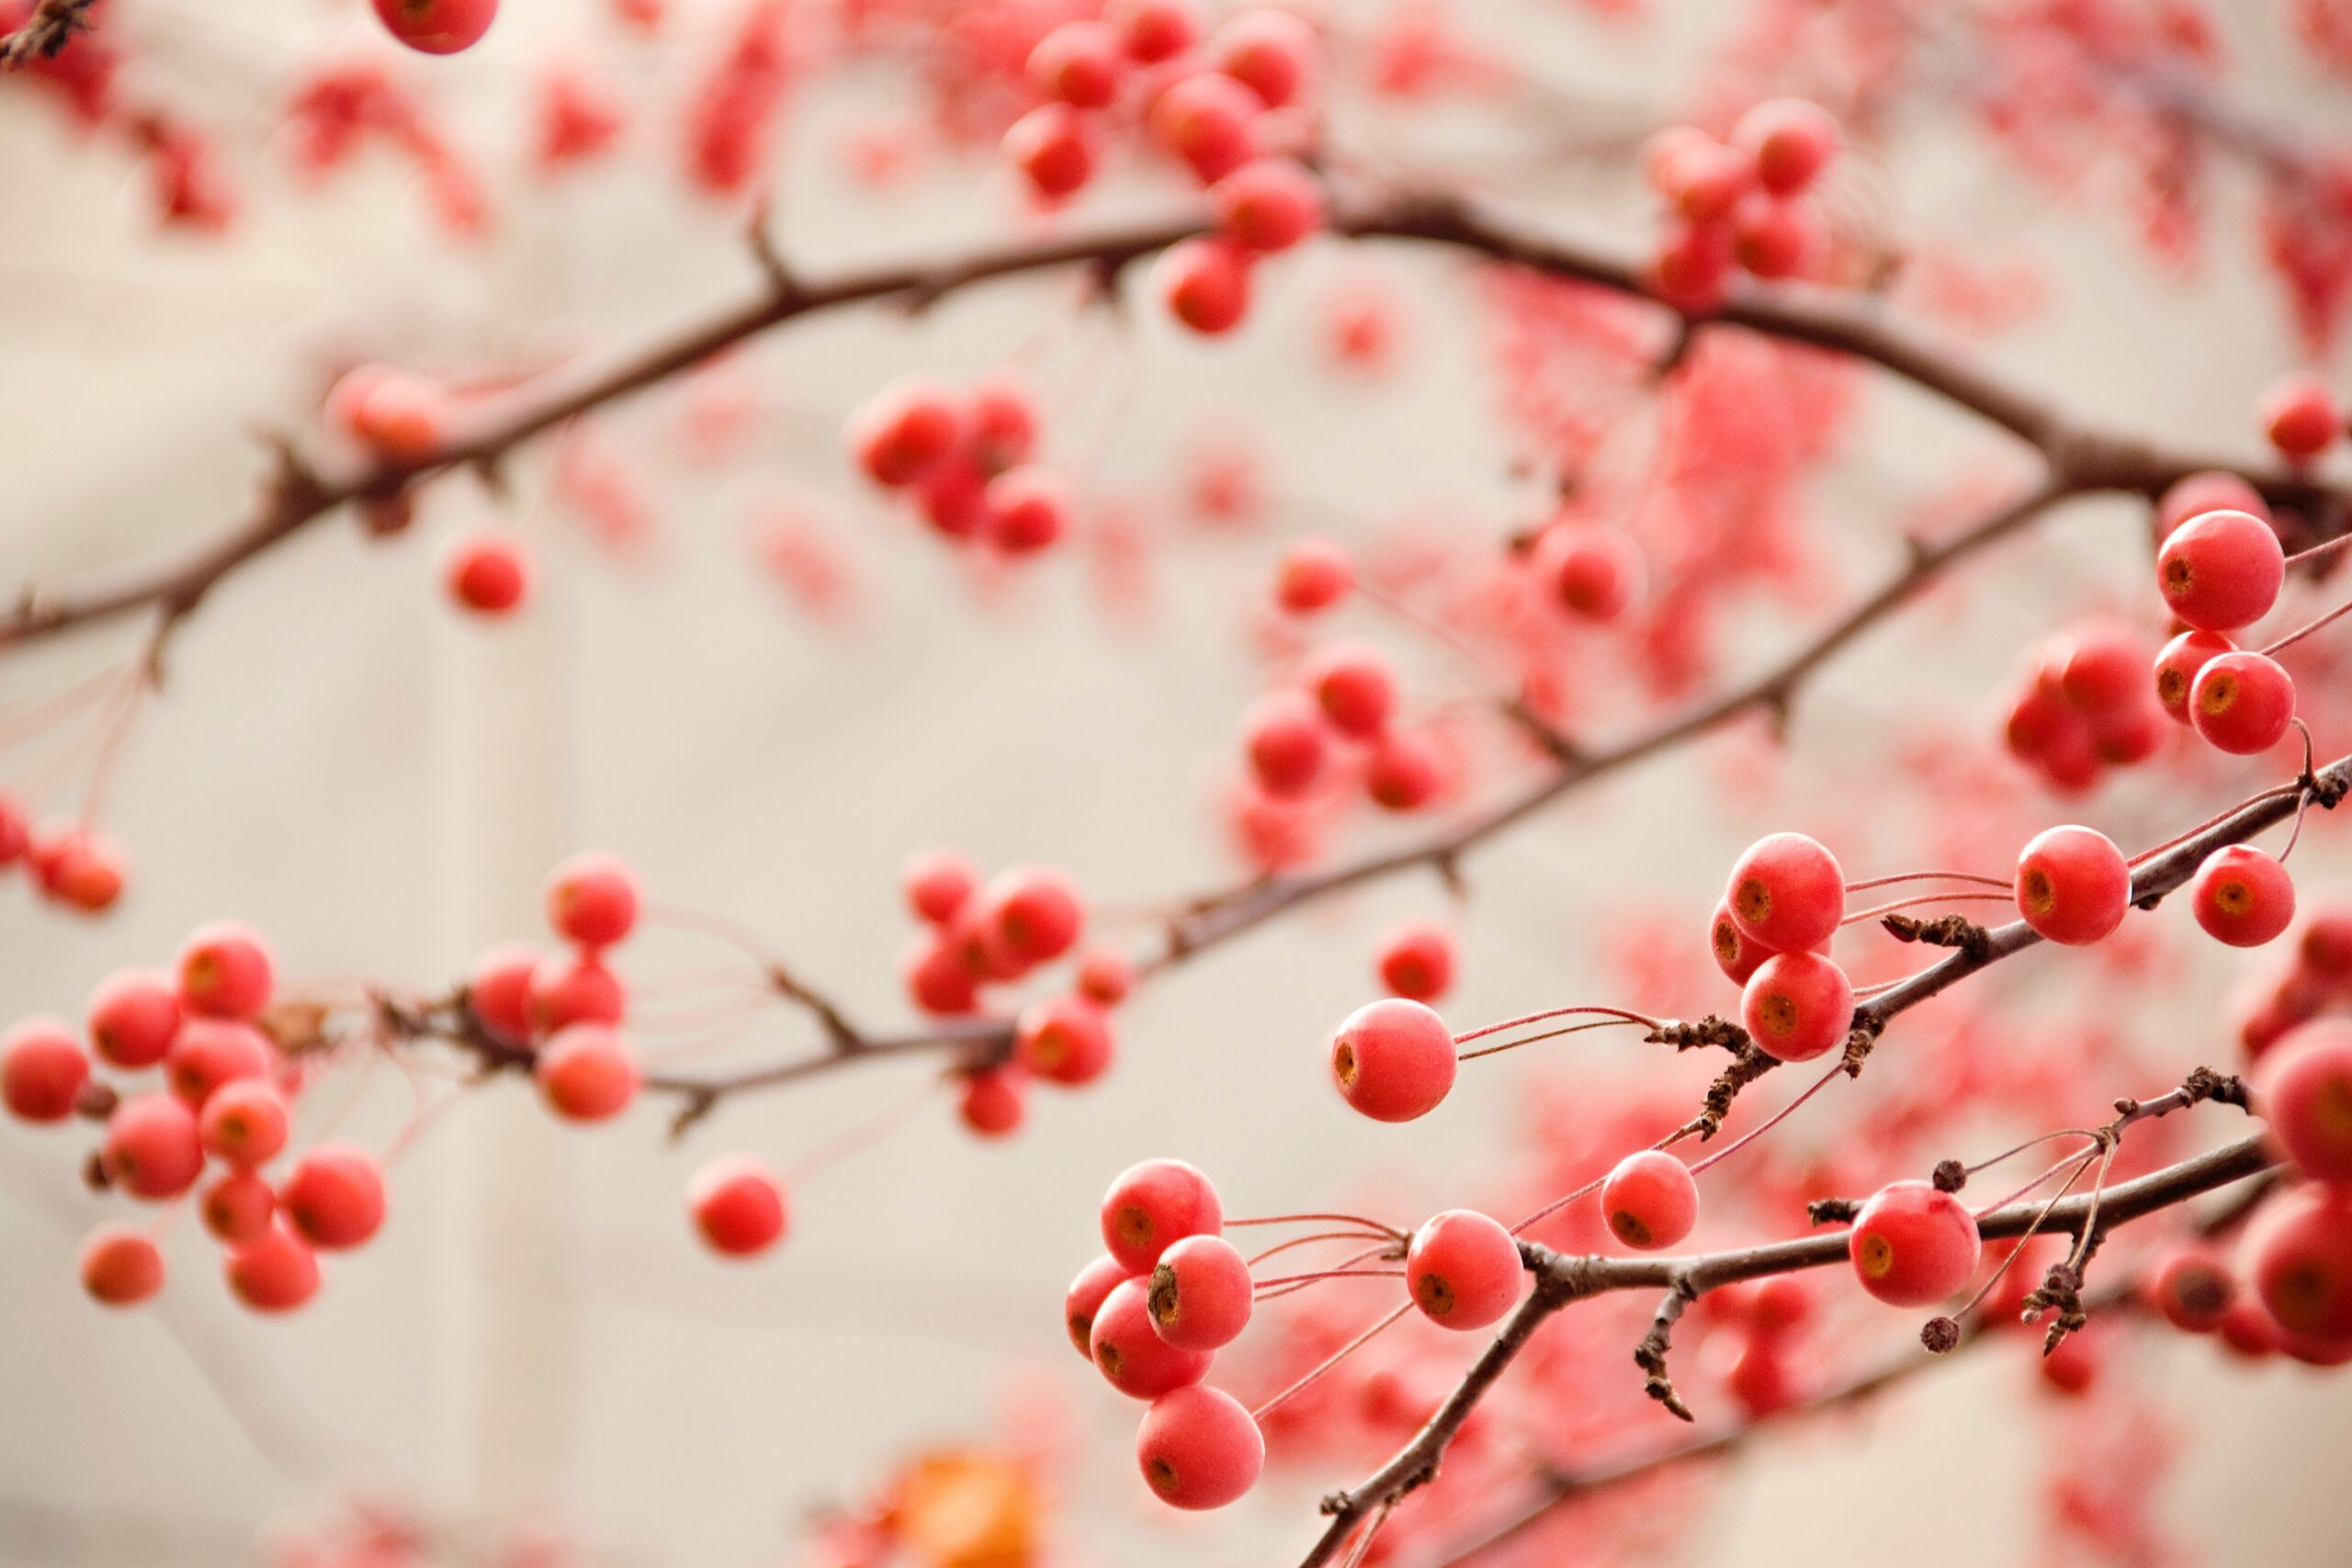 Red Berries Christian Stock Images